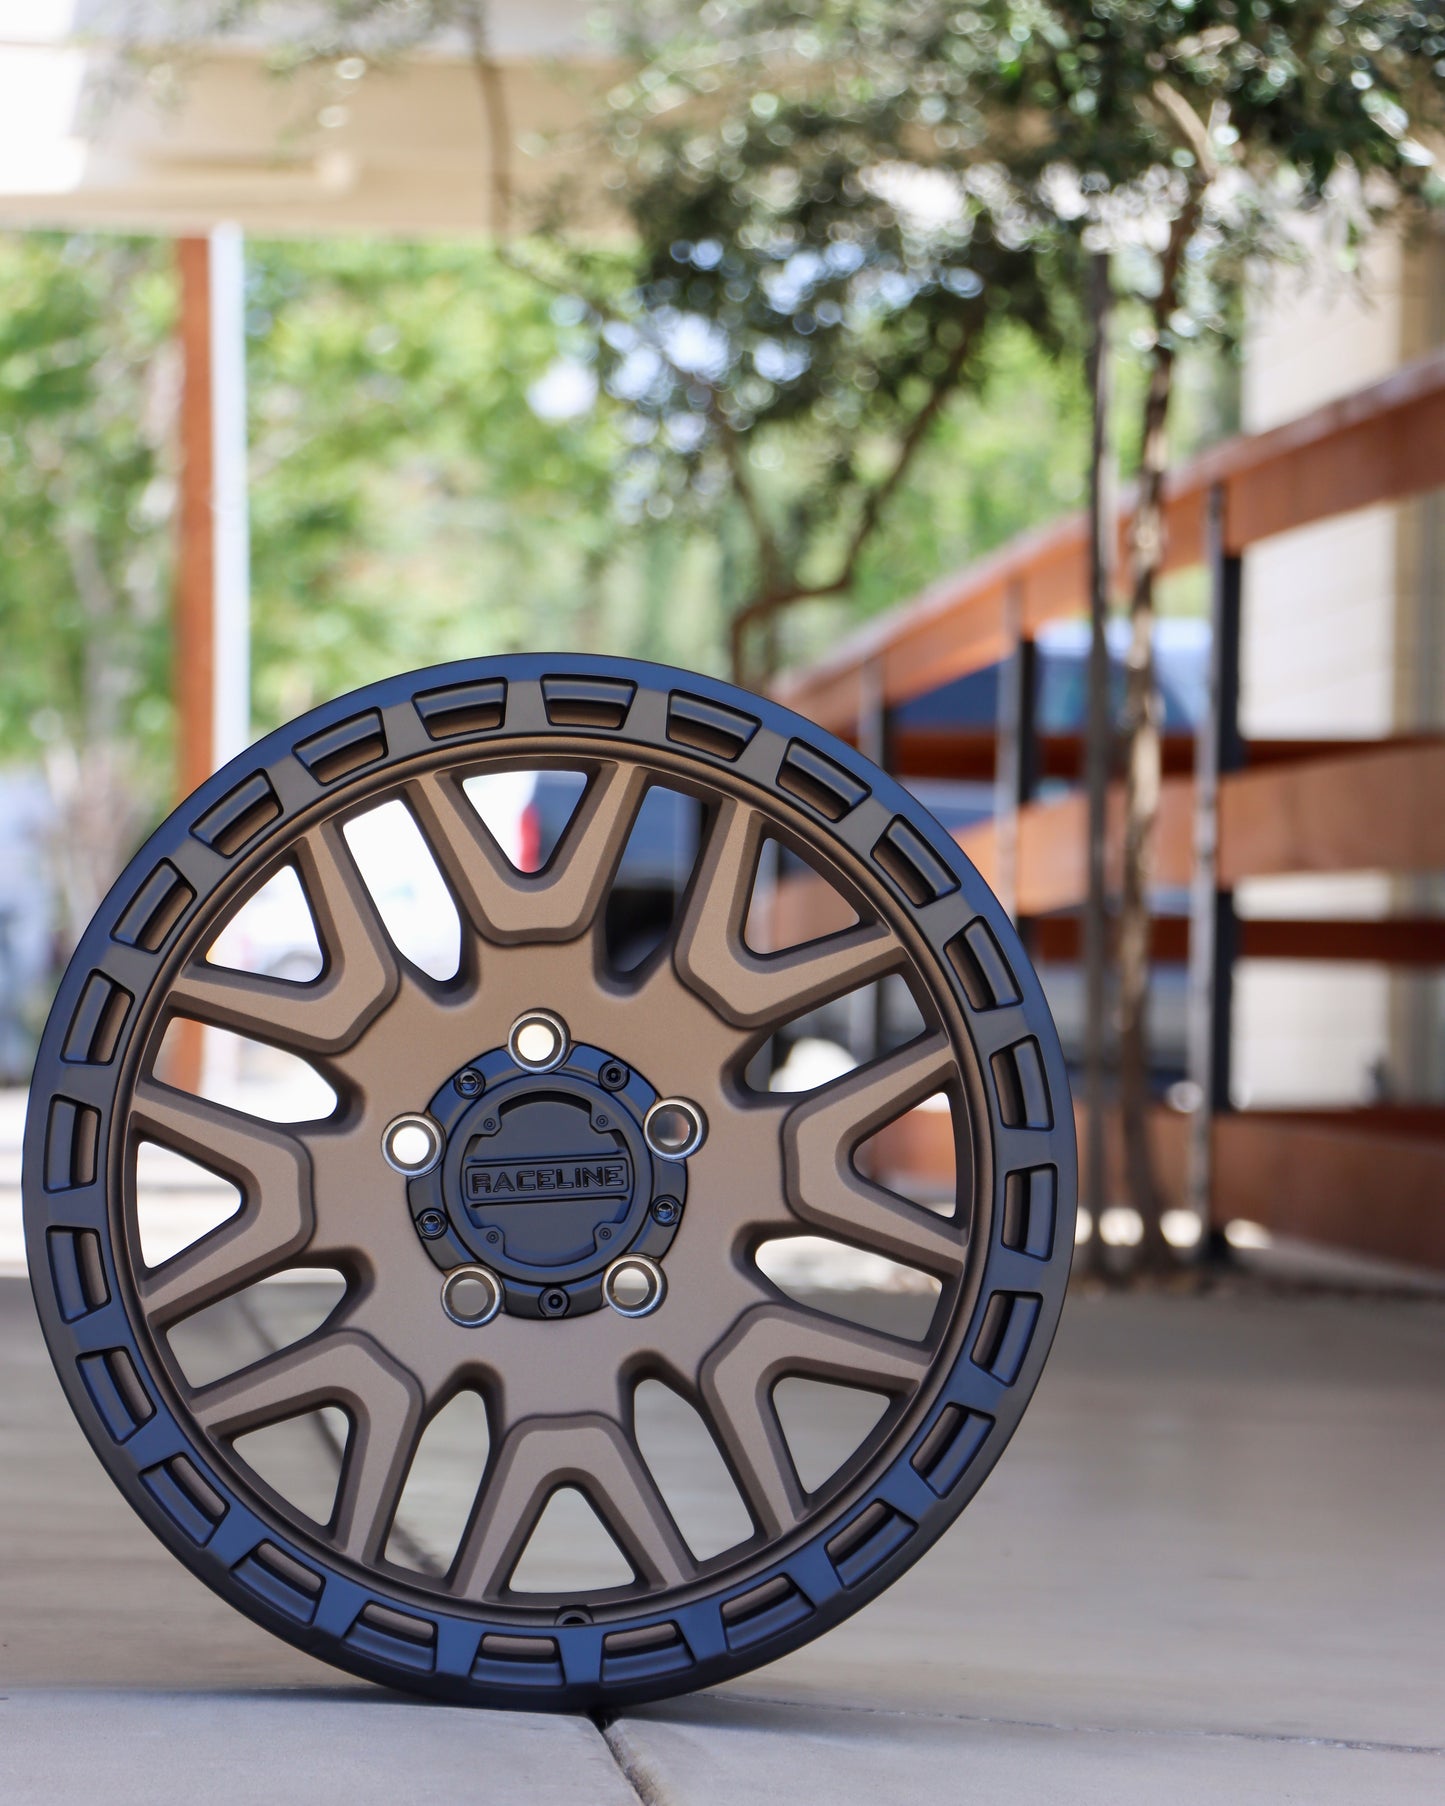 Racline Krank Wheel in a Matte Bronze with a matte black ring, sitting on the concrete with a wood fence and little olive trees in the background.